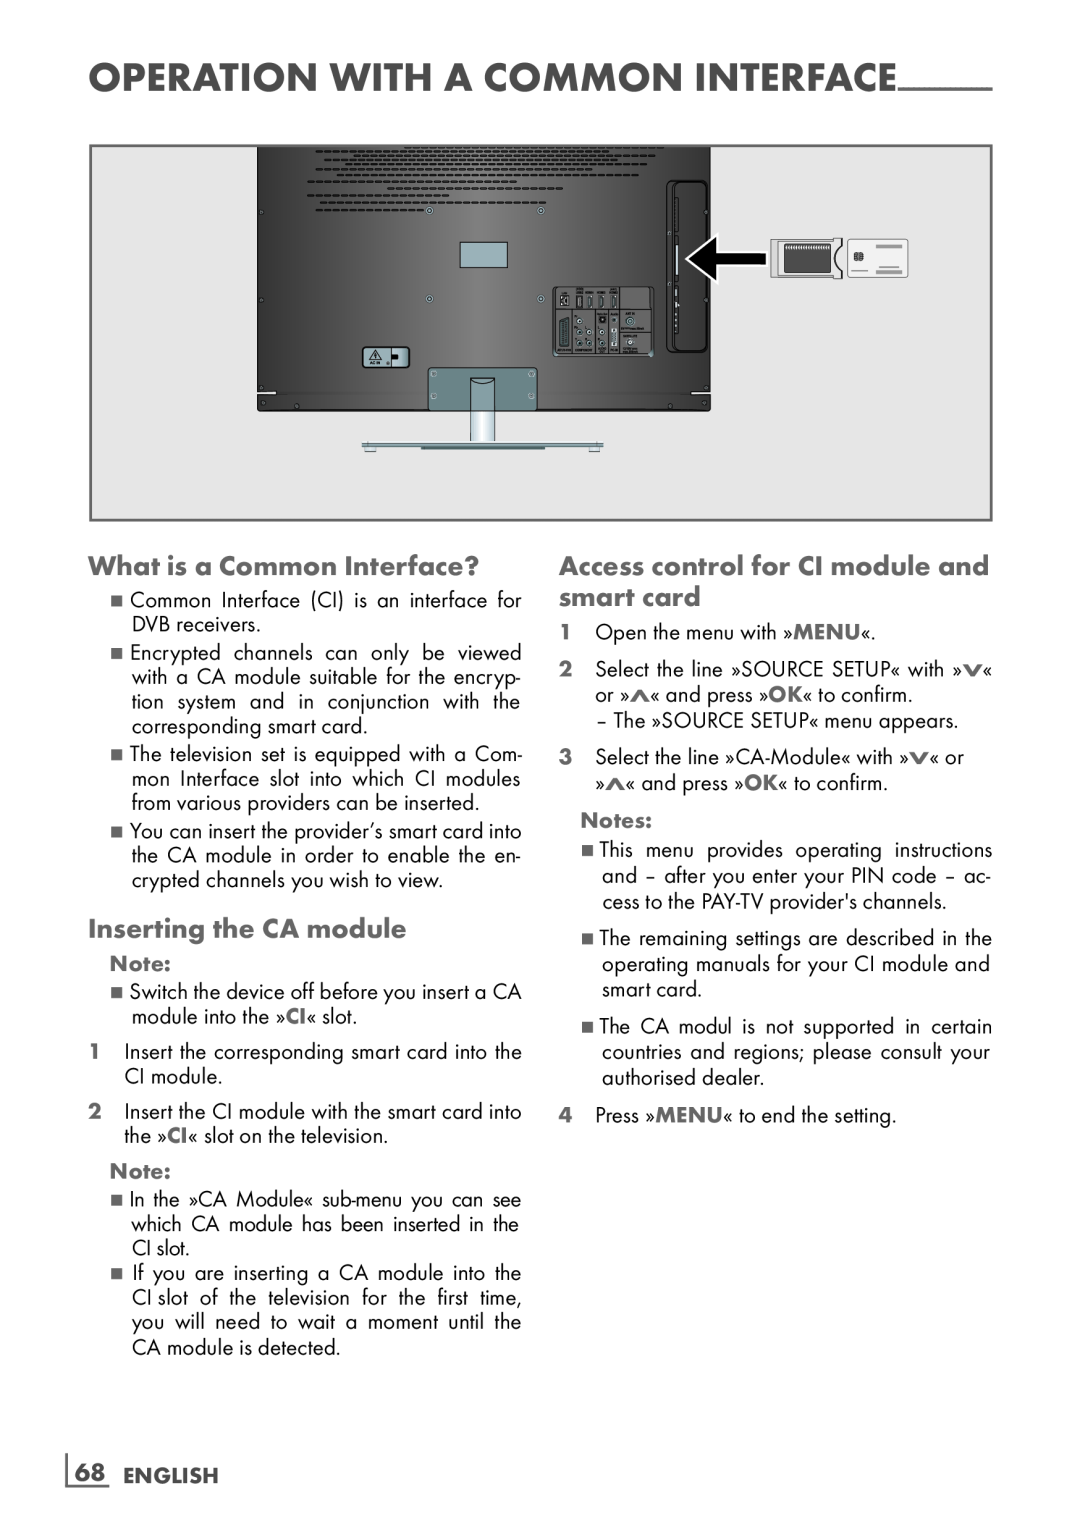 Grundig 40 VLE 8160 BL manual Operation with a Common Interface, What is a Common Interface?, Inserting the CA module 